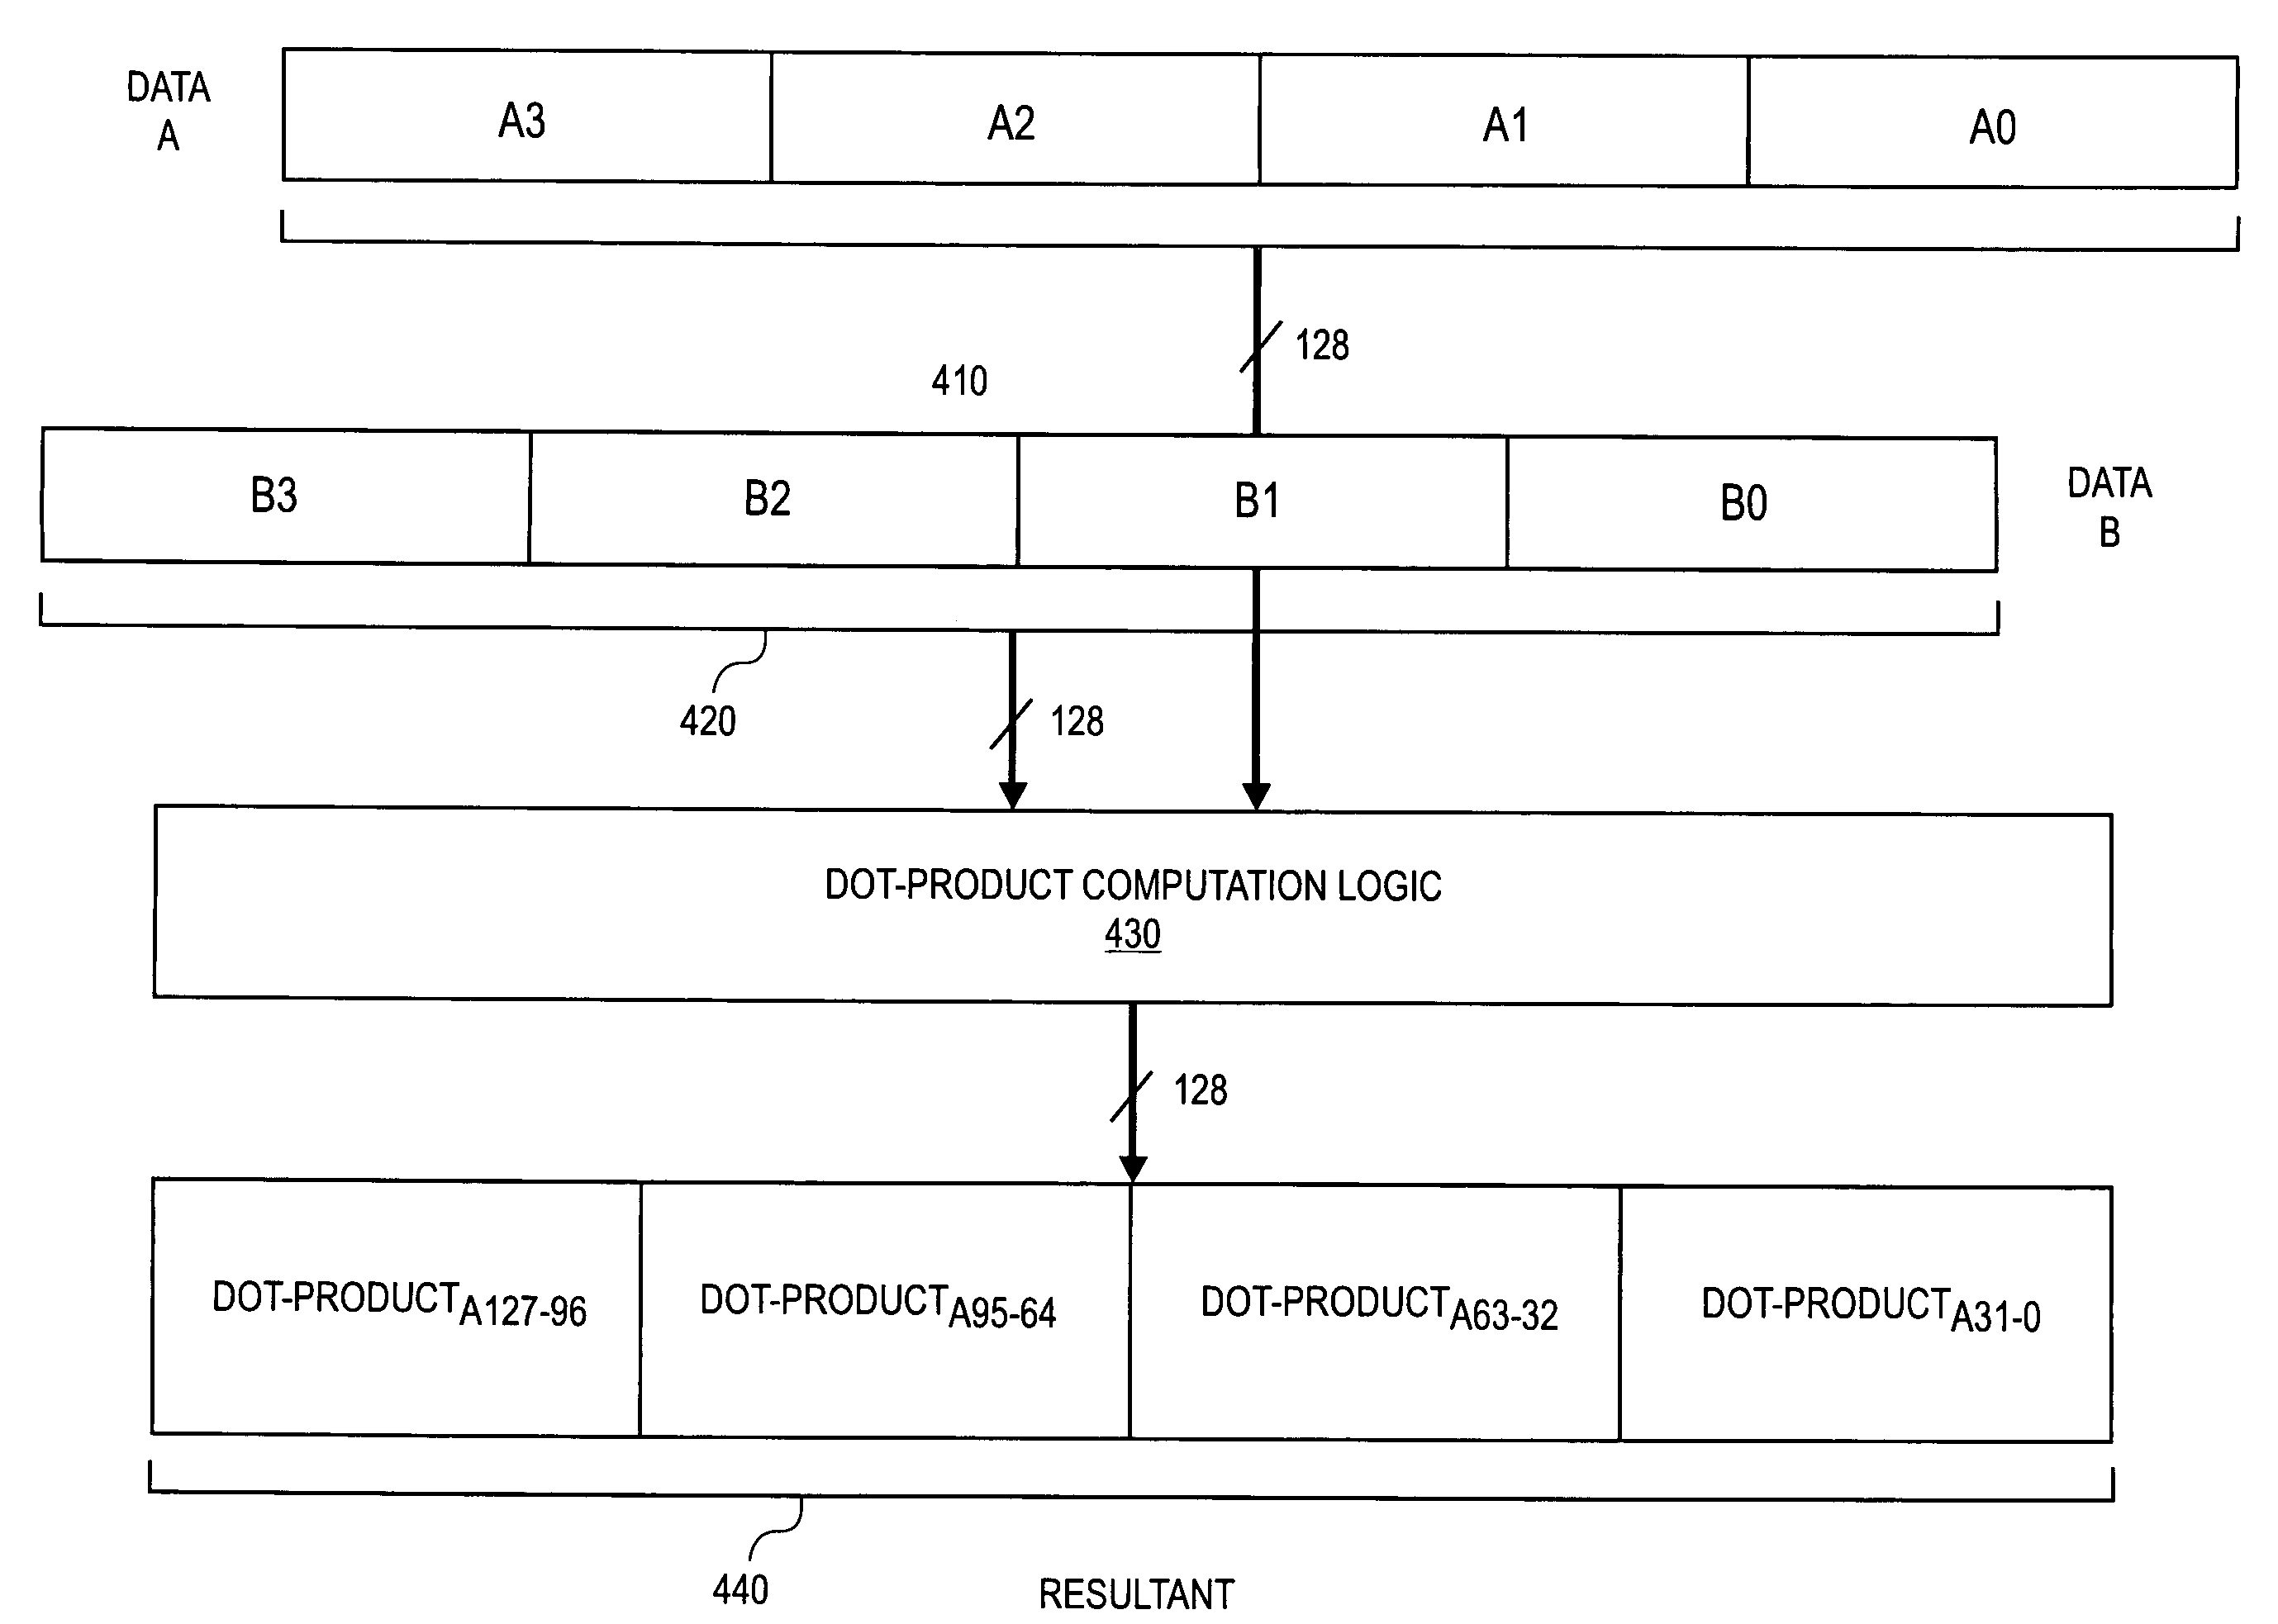 Instruction and logic for performing a dot-product operation